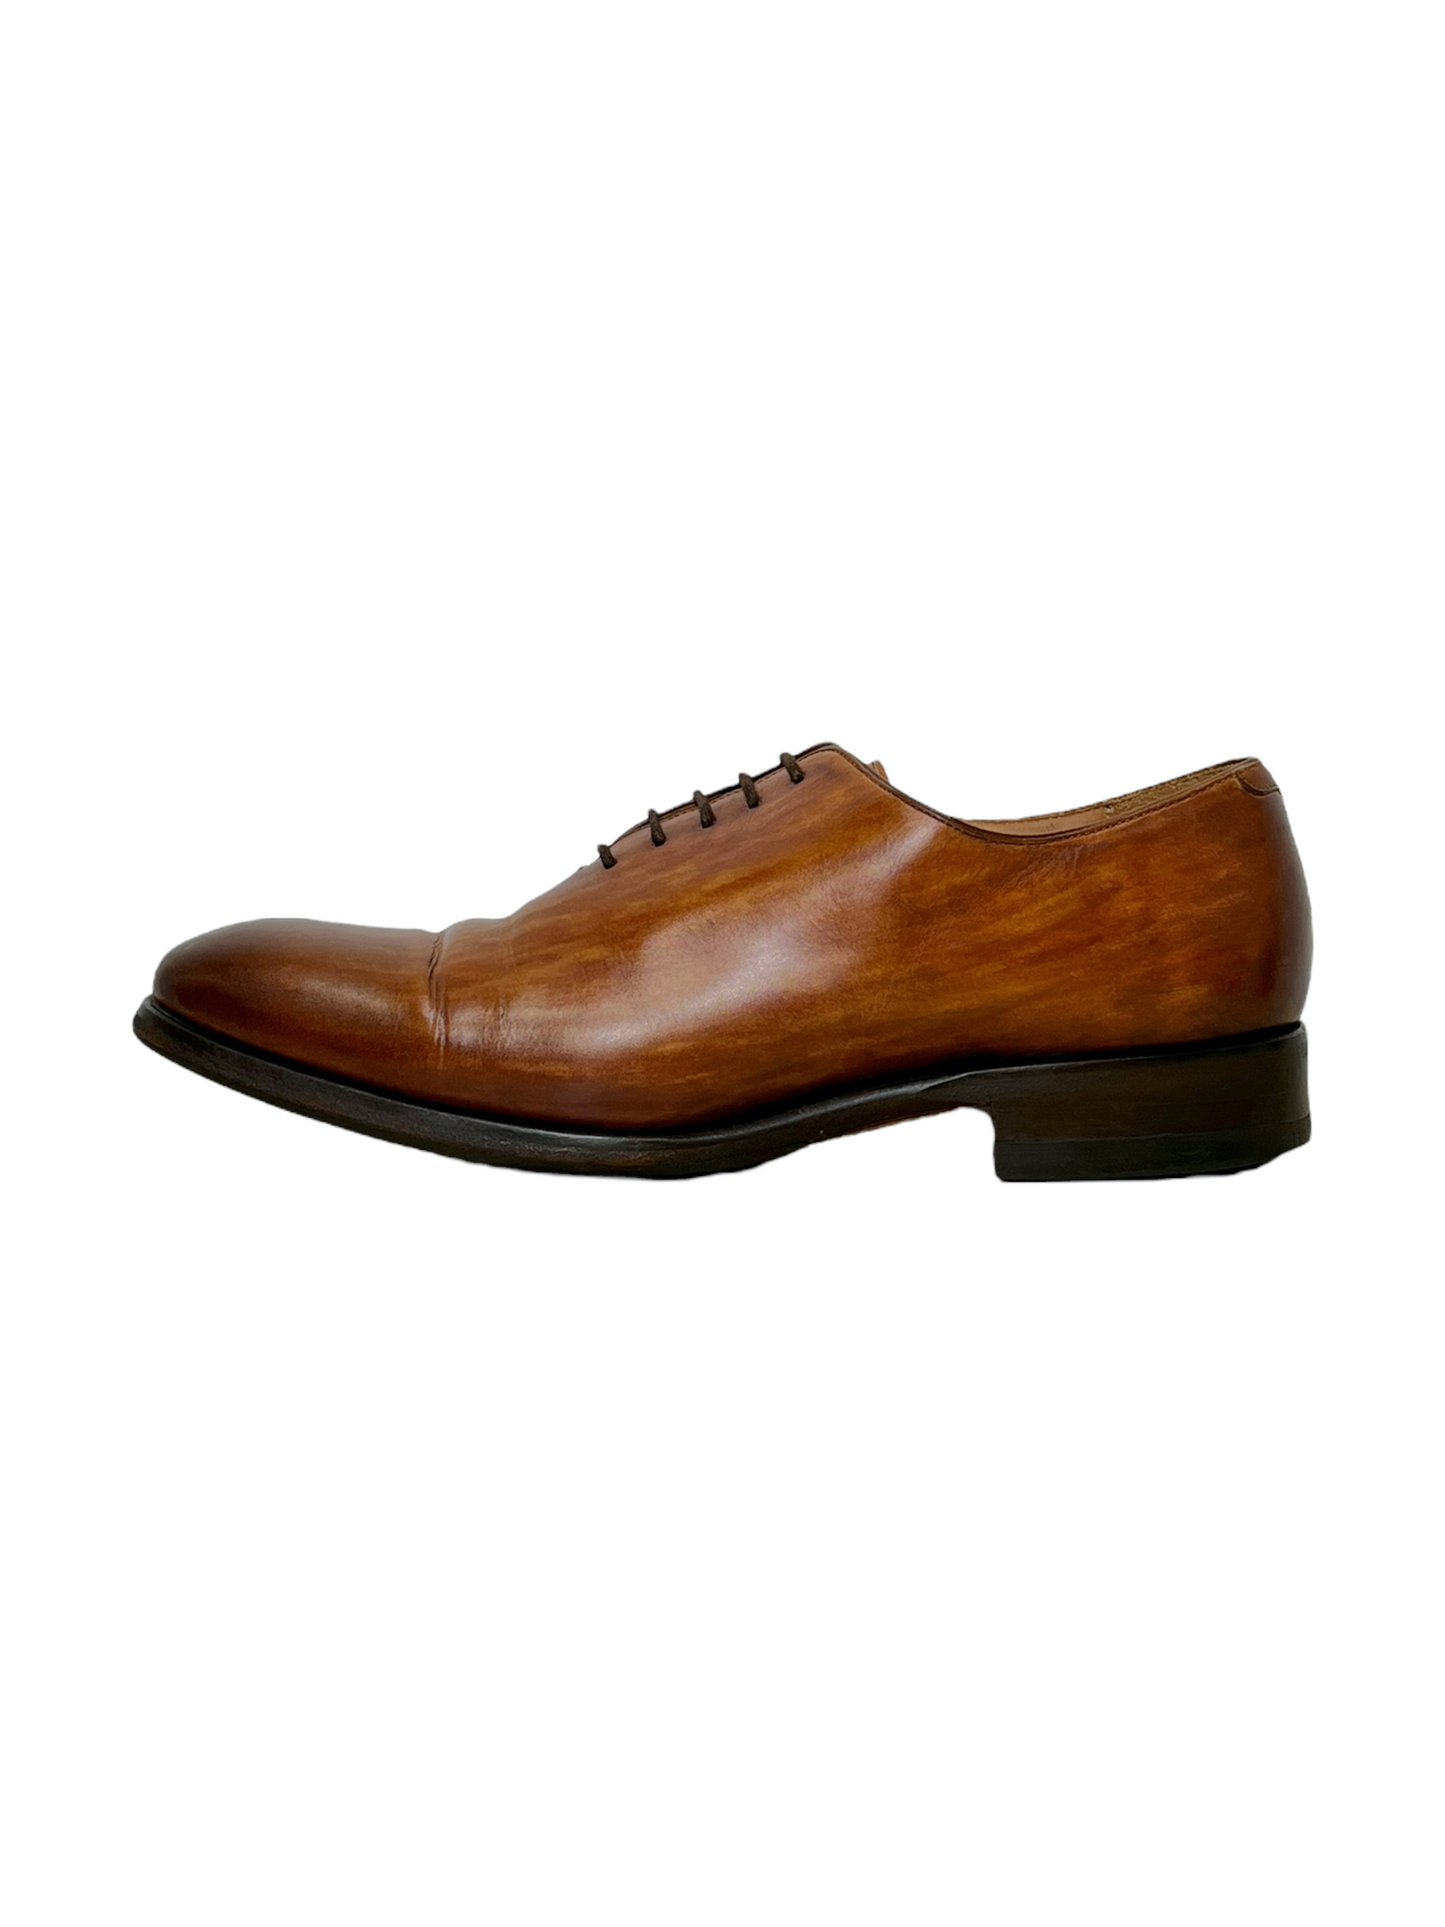 Magnanni Tan Leather Full Cut Oxford Dress Shoes - Genuine Design Luxury Consignment for Men. New & Pre-Owned Clothing, Shoes, & Accessories. Calgary, Canada